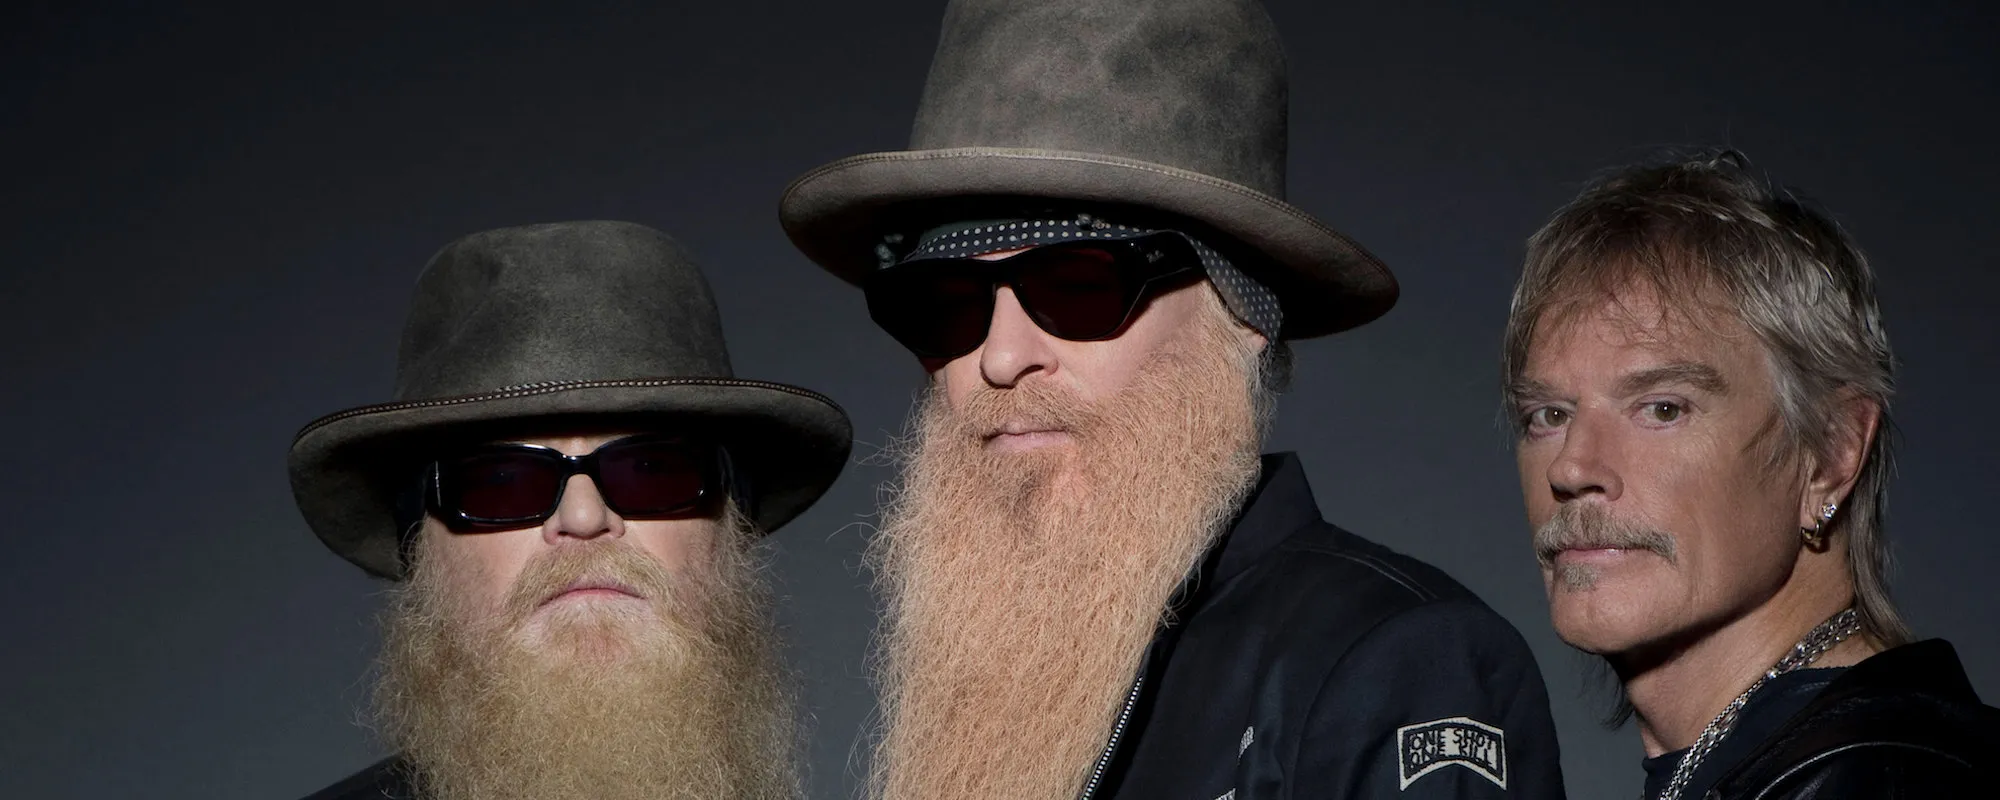 5 Little-Known Facts You Didn’t Know About ZZ Top